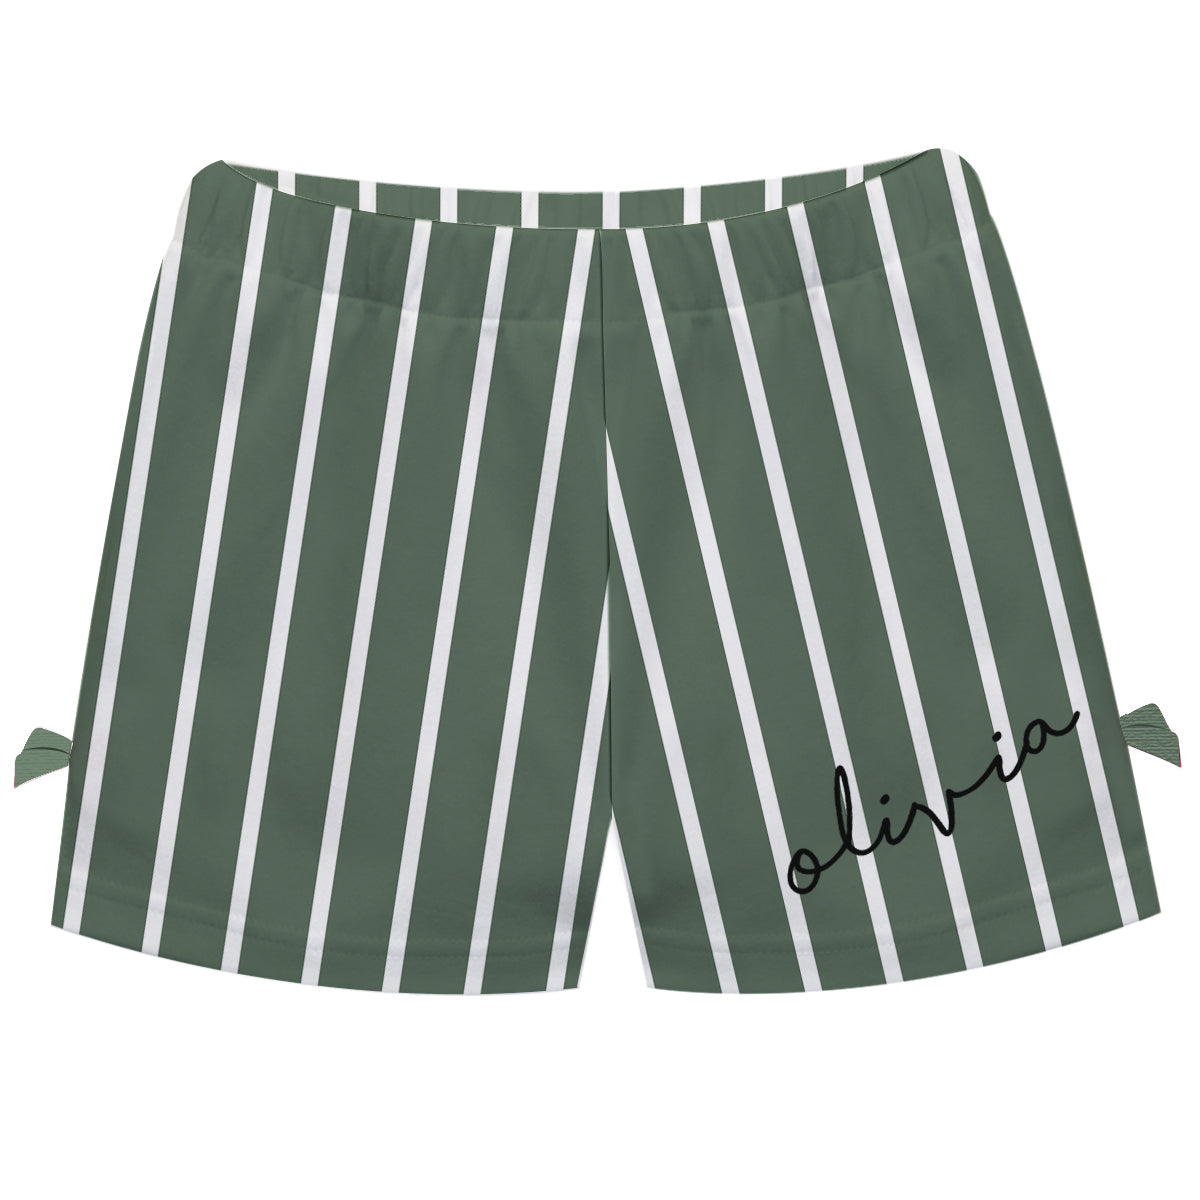 Girls green and white striped short with name - Wimziy&Co.